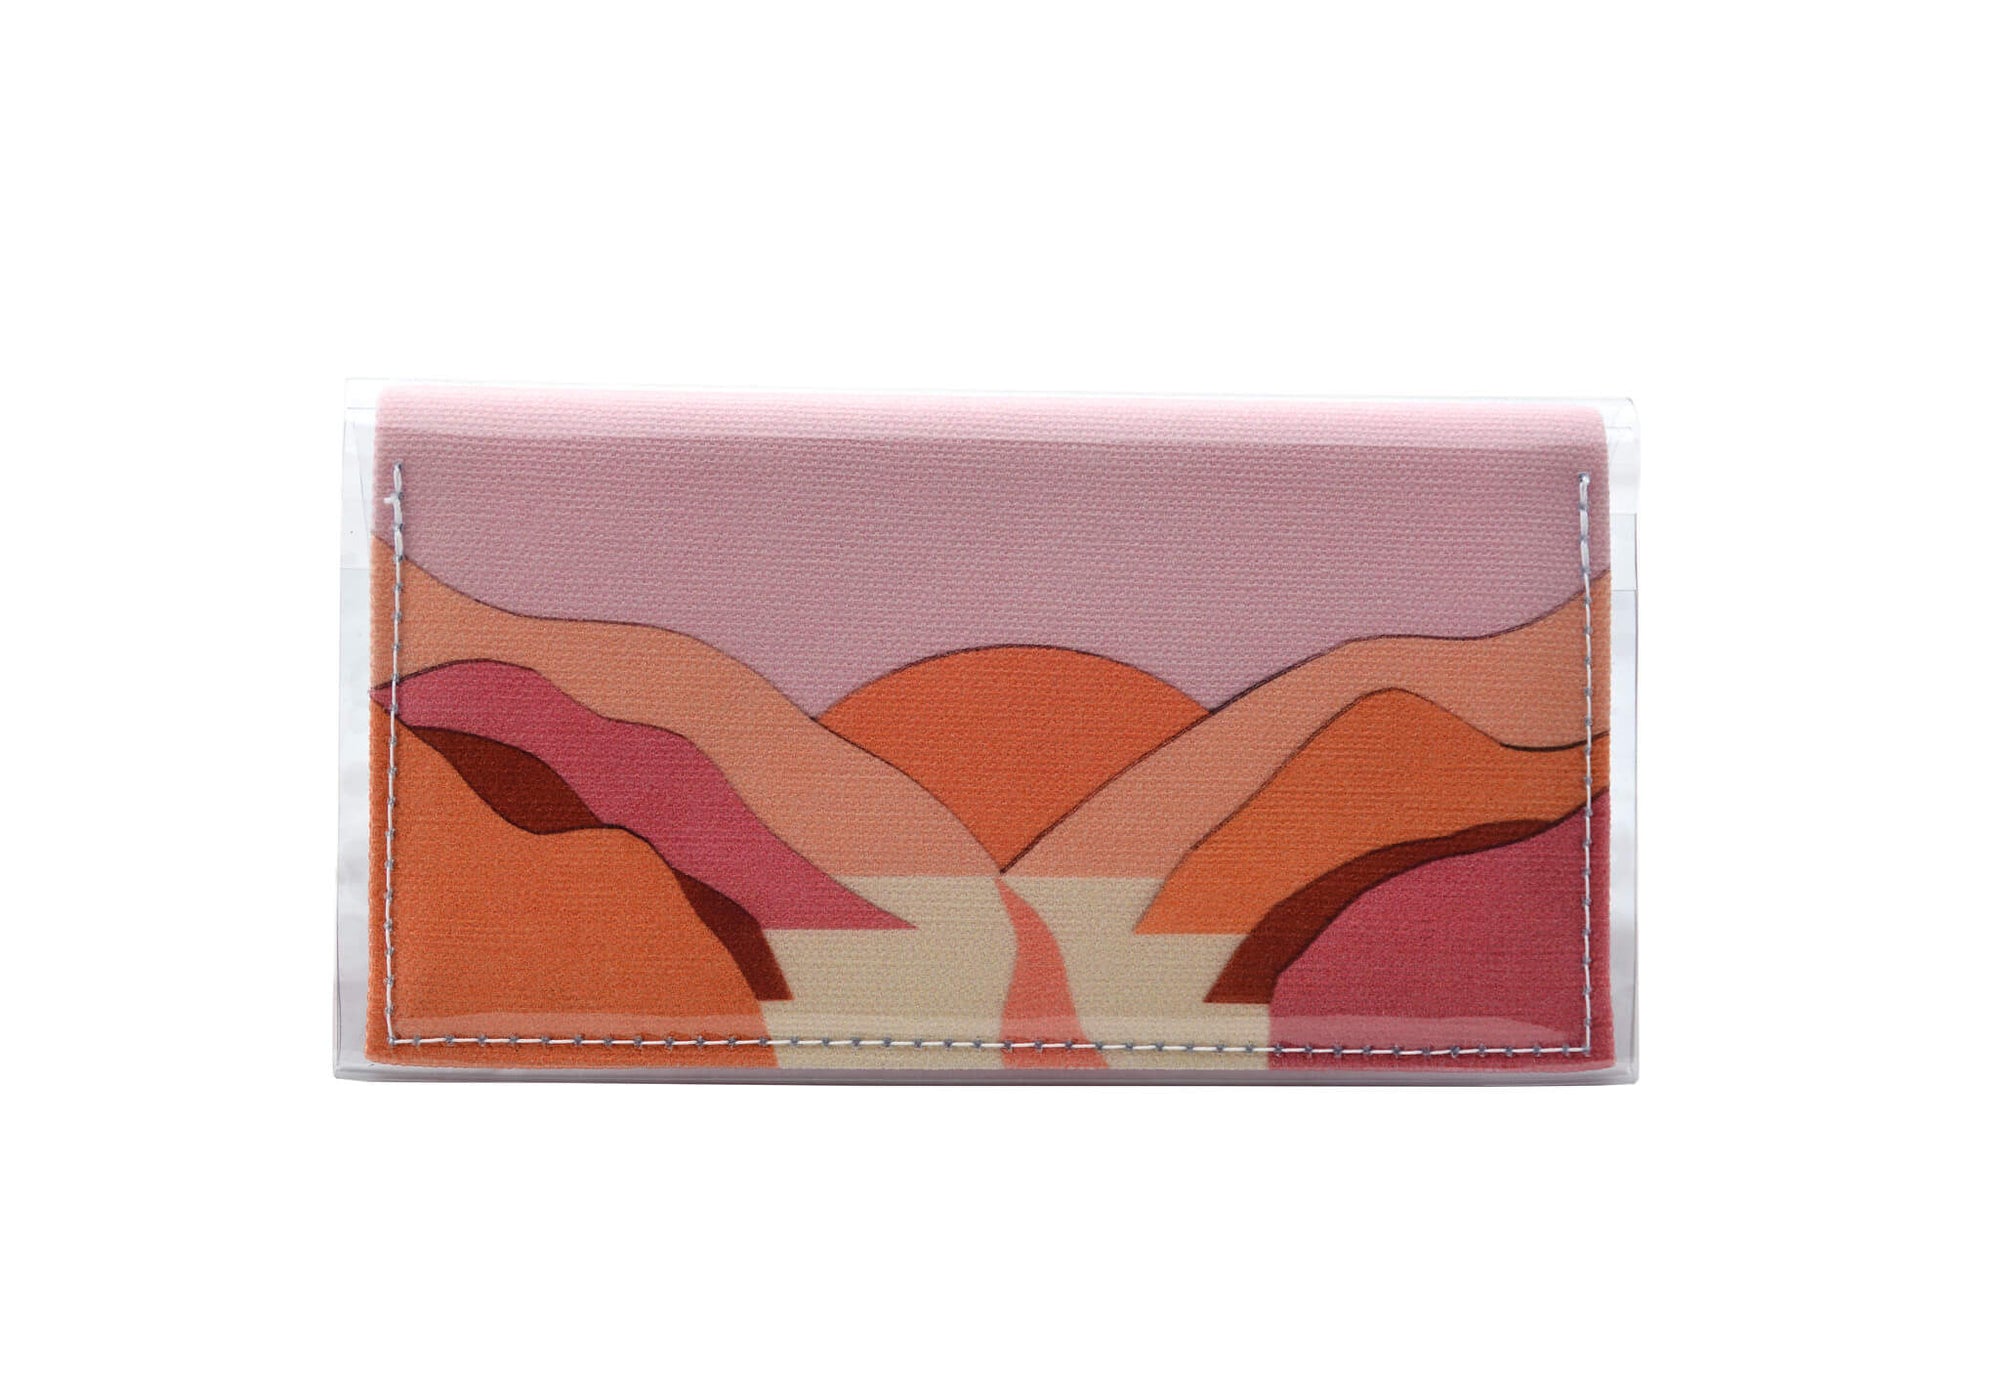 This is an image of the rear of a Kitty Came Home bifold mini purse clutch in 'The golden dawn' design by Satin and Tat. A path wends through a valley of pink and orange hills towards an orange rising sun. This is the small size.